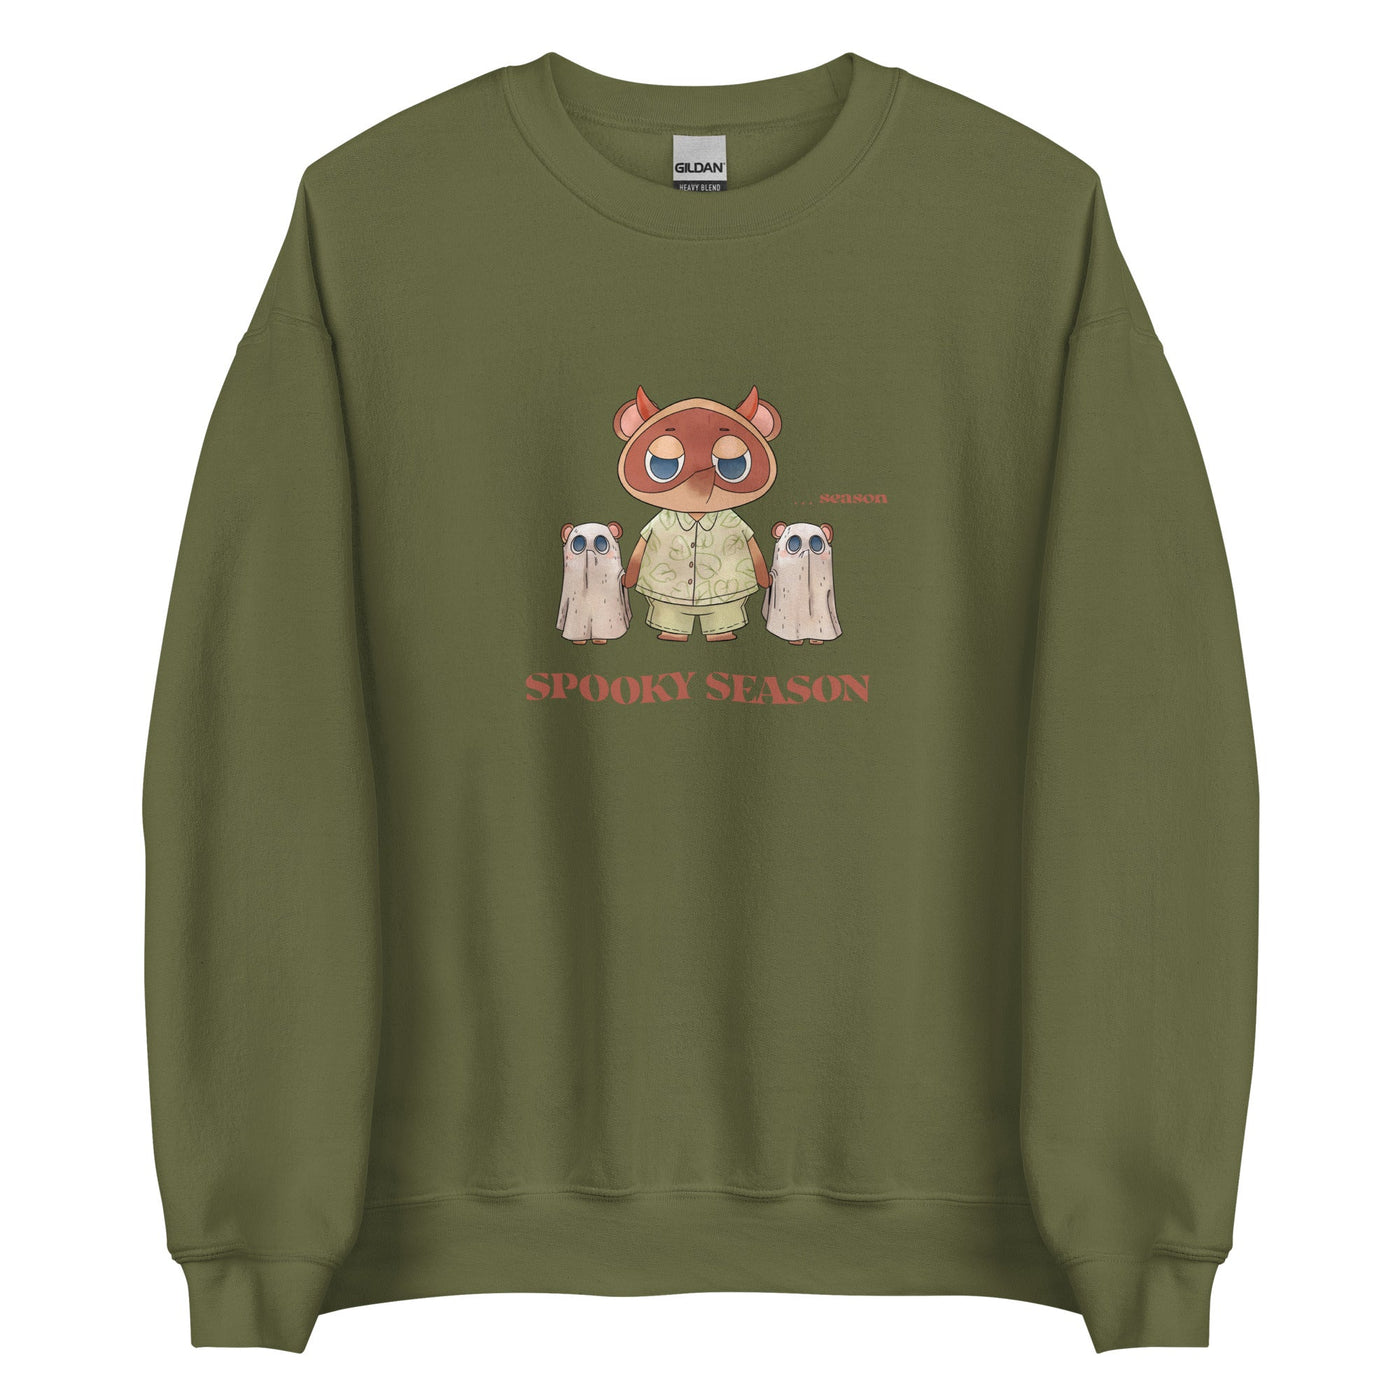 Spooky Season | Unisex Sweatshirt | Animal Crossing Fall Cozy Gamer Threads and Thistles Inventory Military Green S 